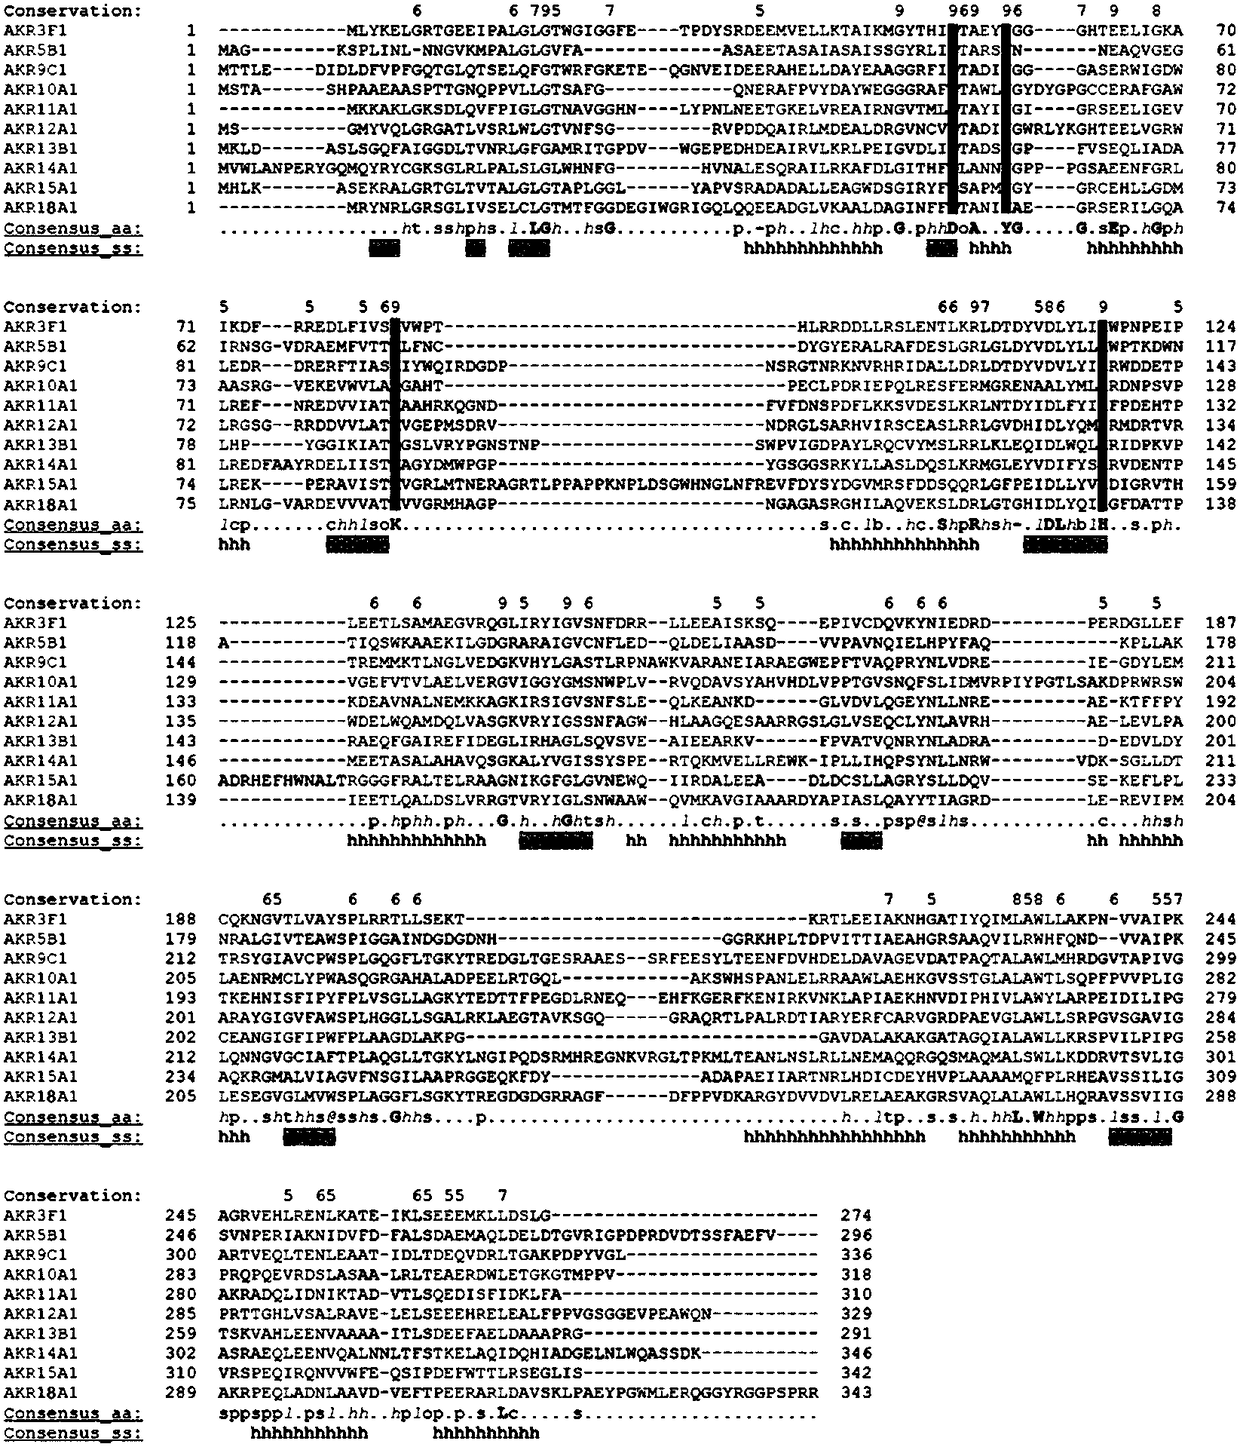 Gene AKR18A1 relevant to detoxification of fusarium toxin and toxic aldehydes and applications of gene AKR18A1